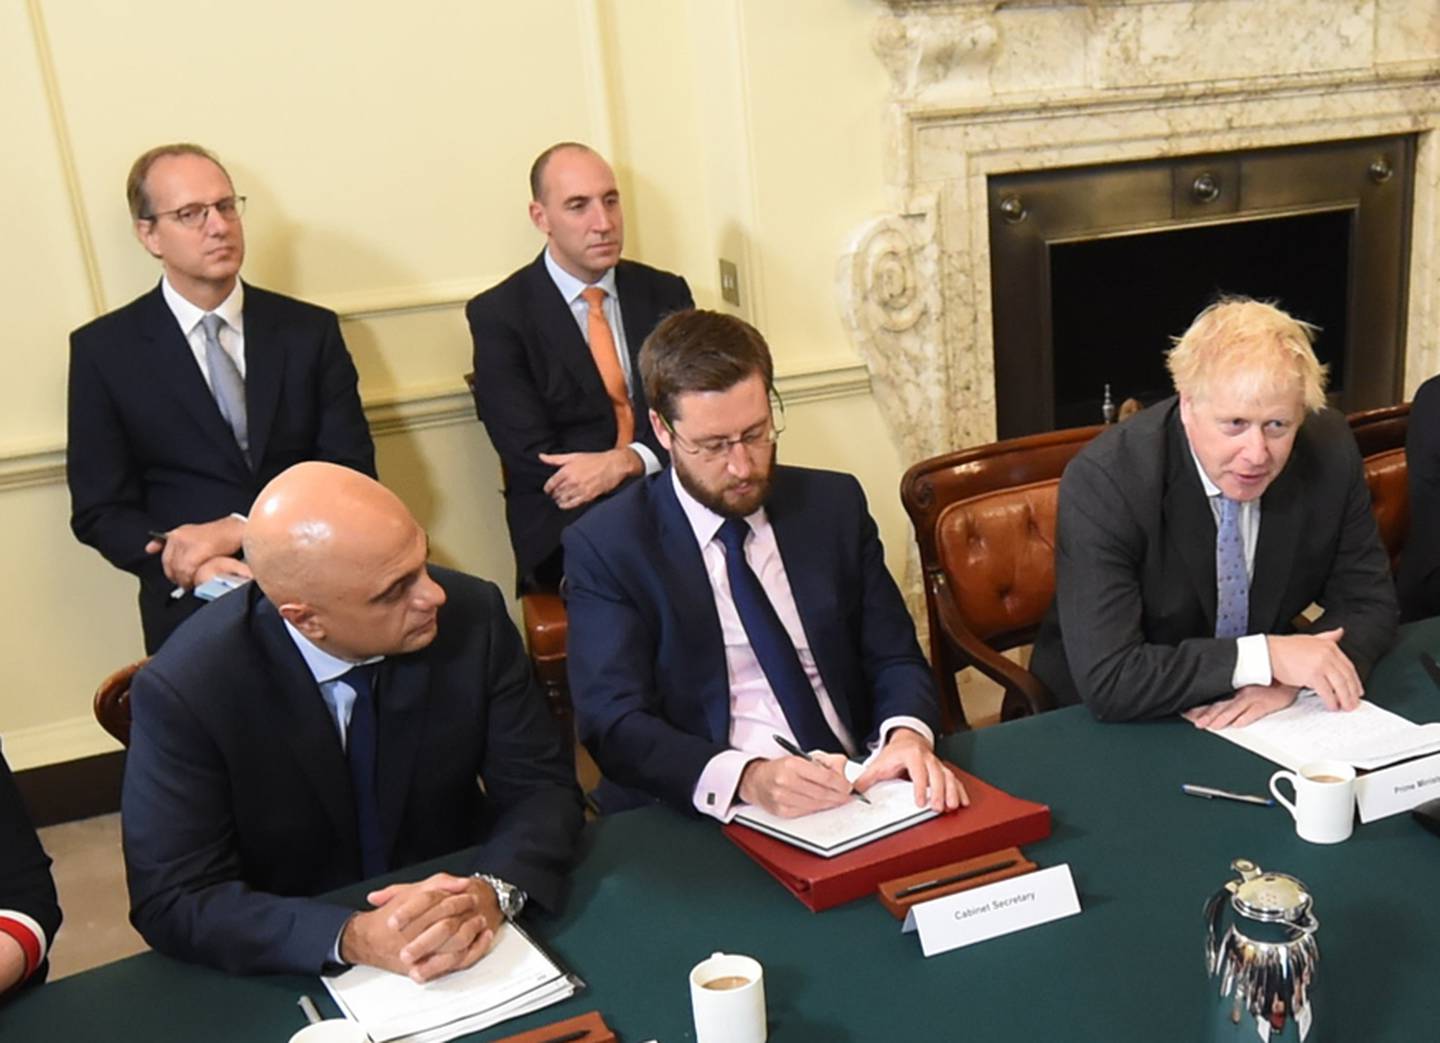 Martin Reynolds, the prime minister's principal private secretary, seated back left, is expected to be purged from Downing Street as part of a mass clear-out of aides. PA